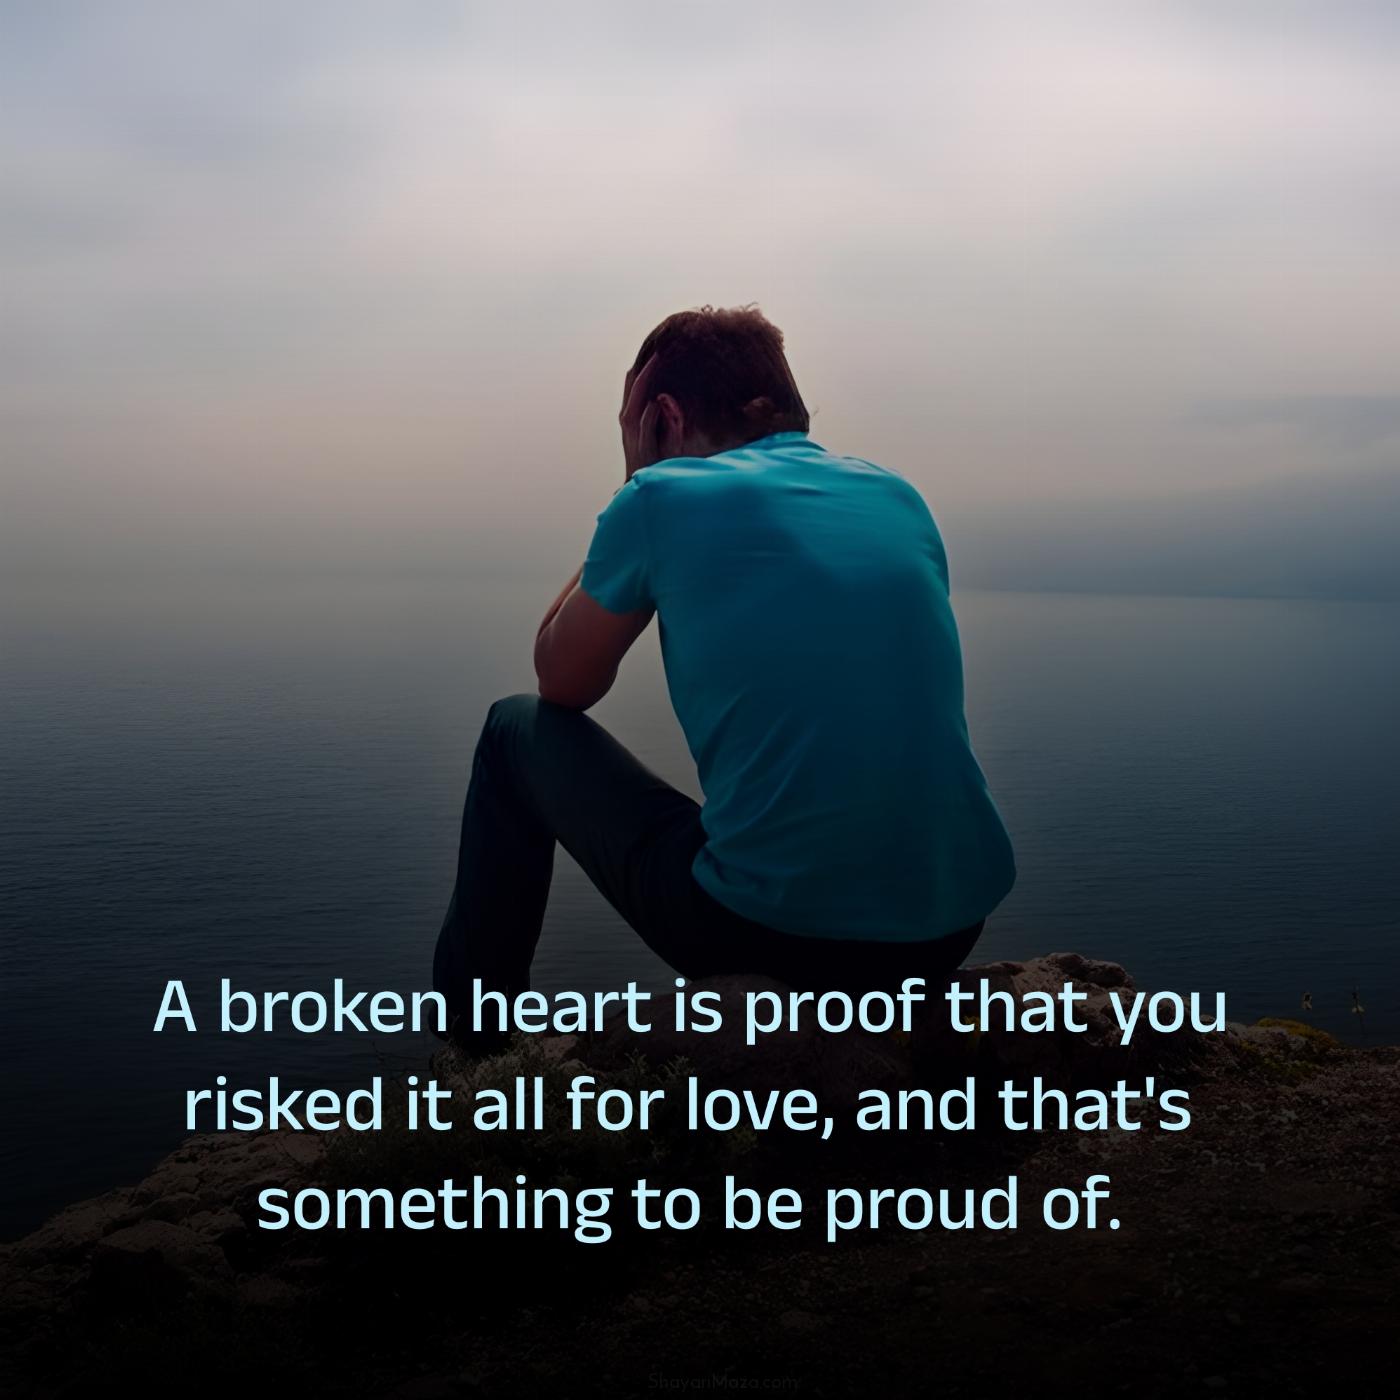 A broken heart is proof that you risked it all for love